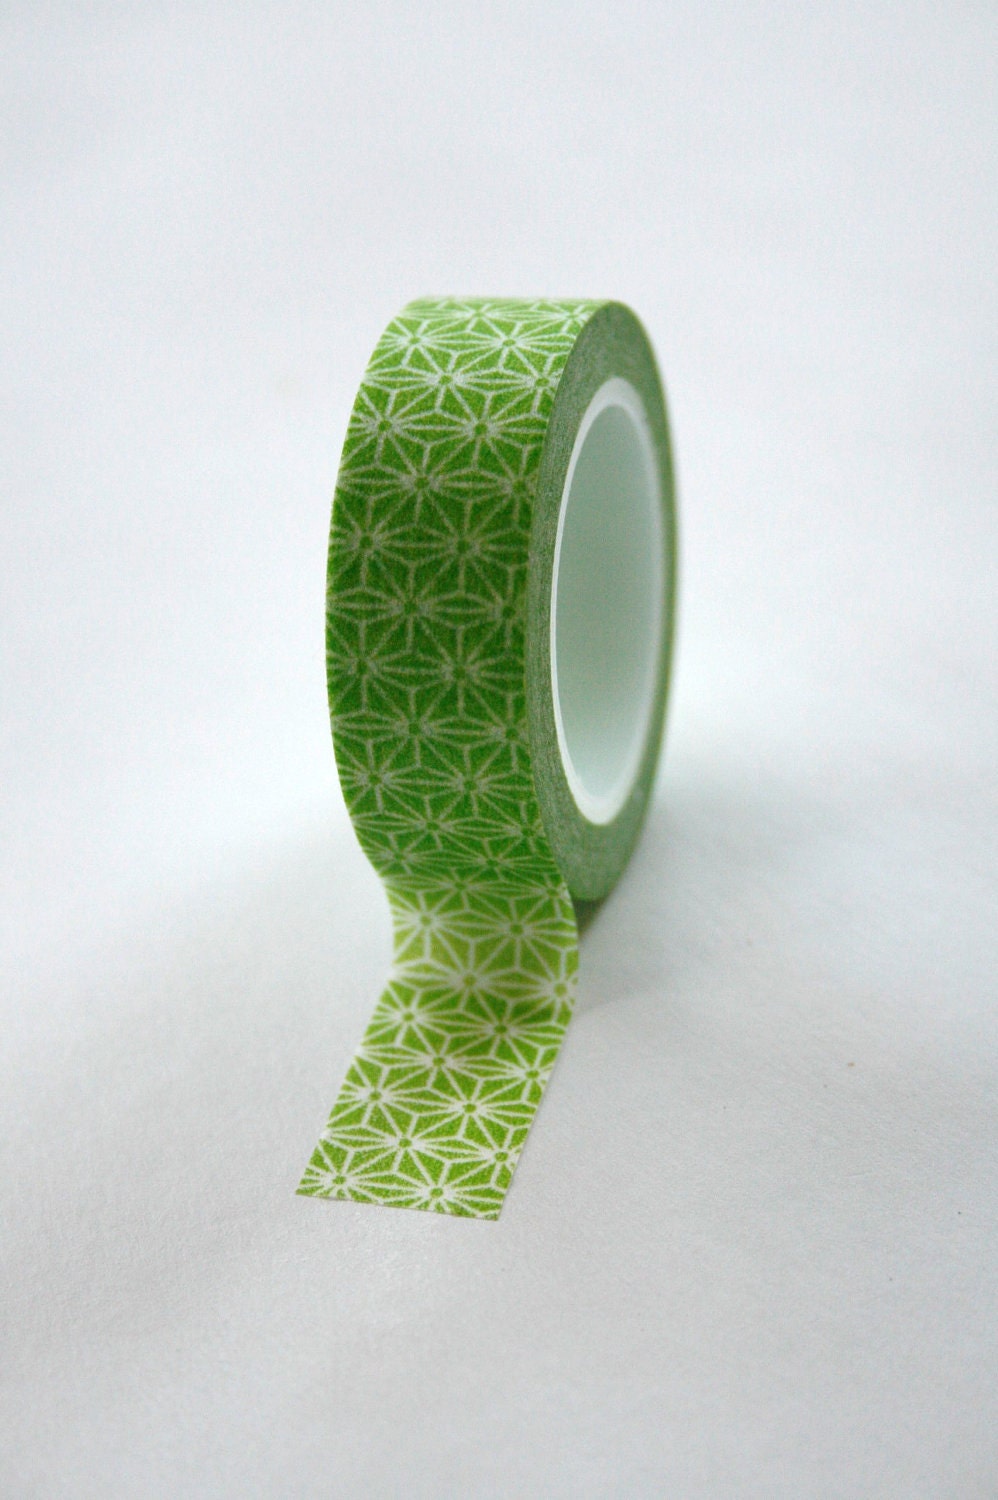 Washi Tape - 15mm - Green and White Geometric Pattern - Deco Paper Tape